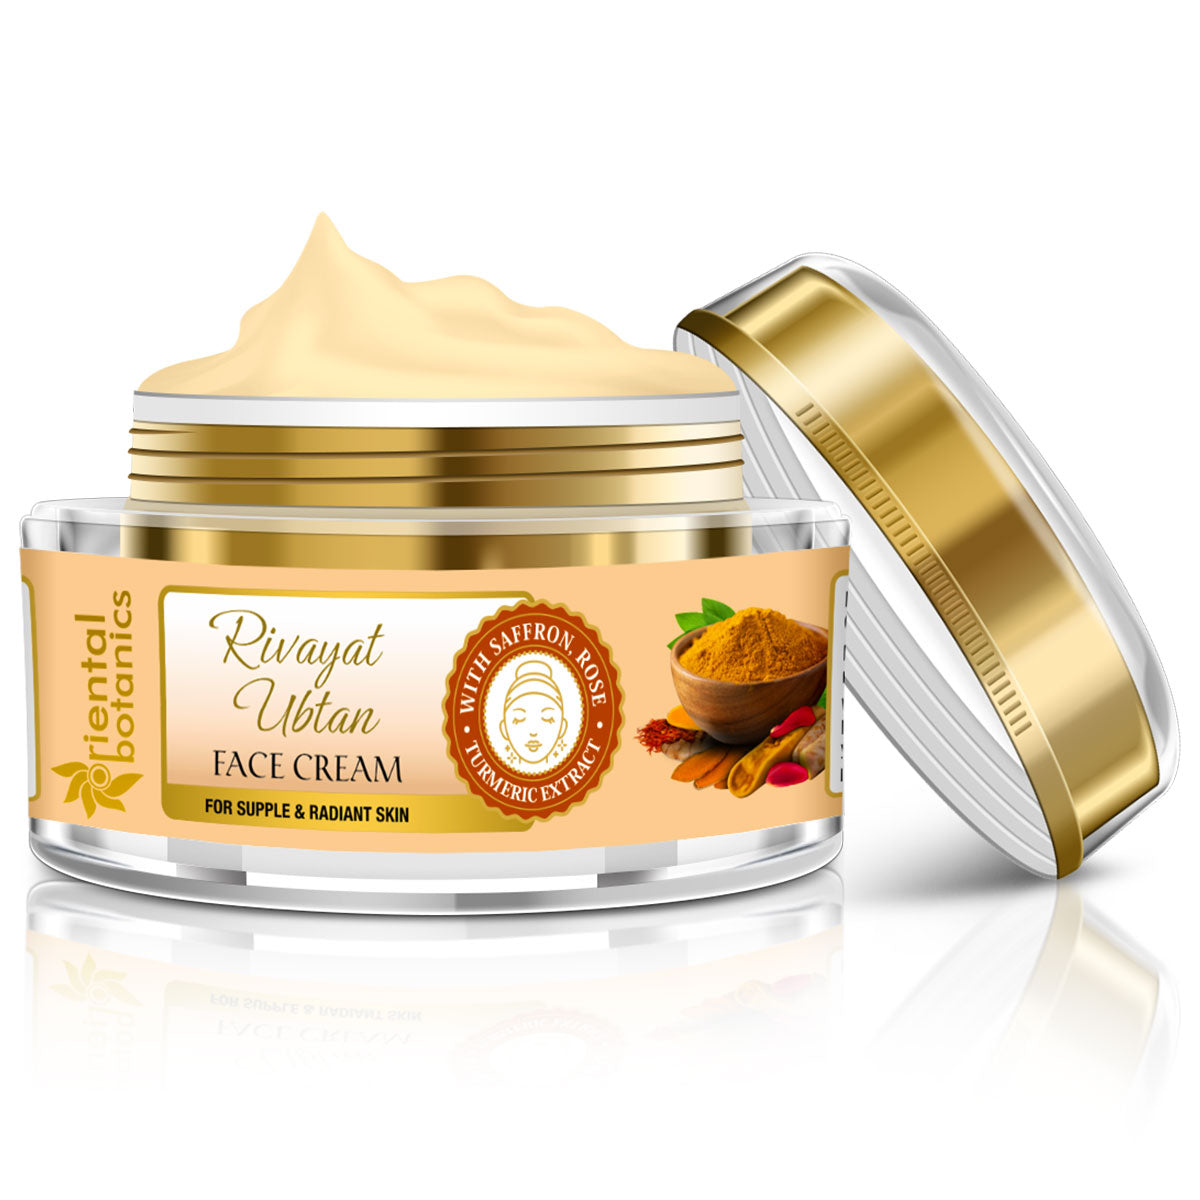 Oriental Botanics Rivayat Ubtan Face Cream For Supple and Radiant Skin With Saffron, Rose and Turmeric Extract, 50 g